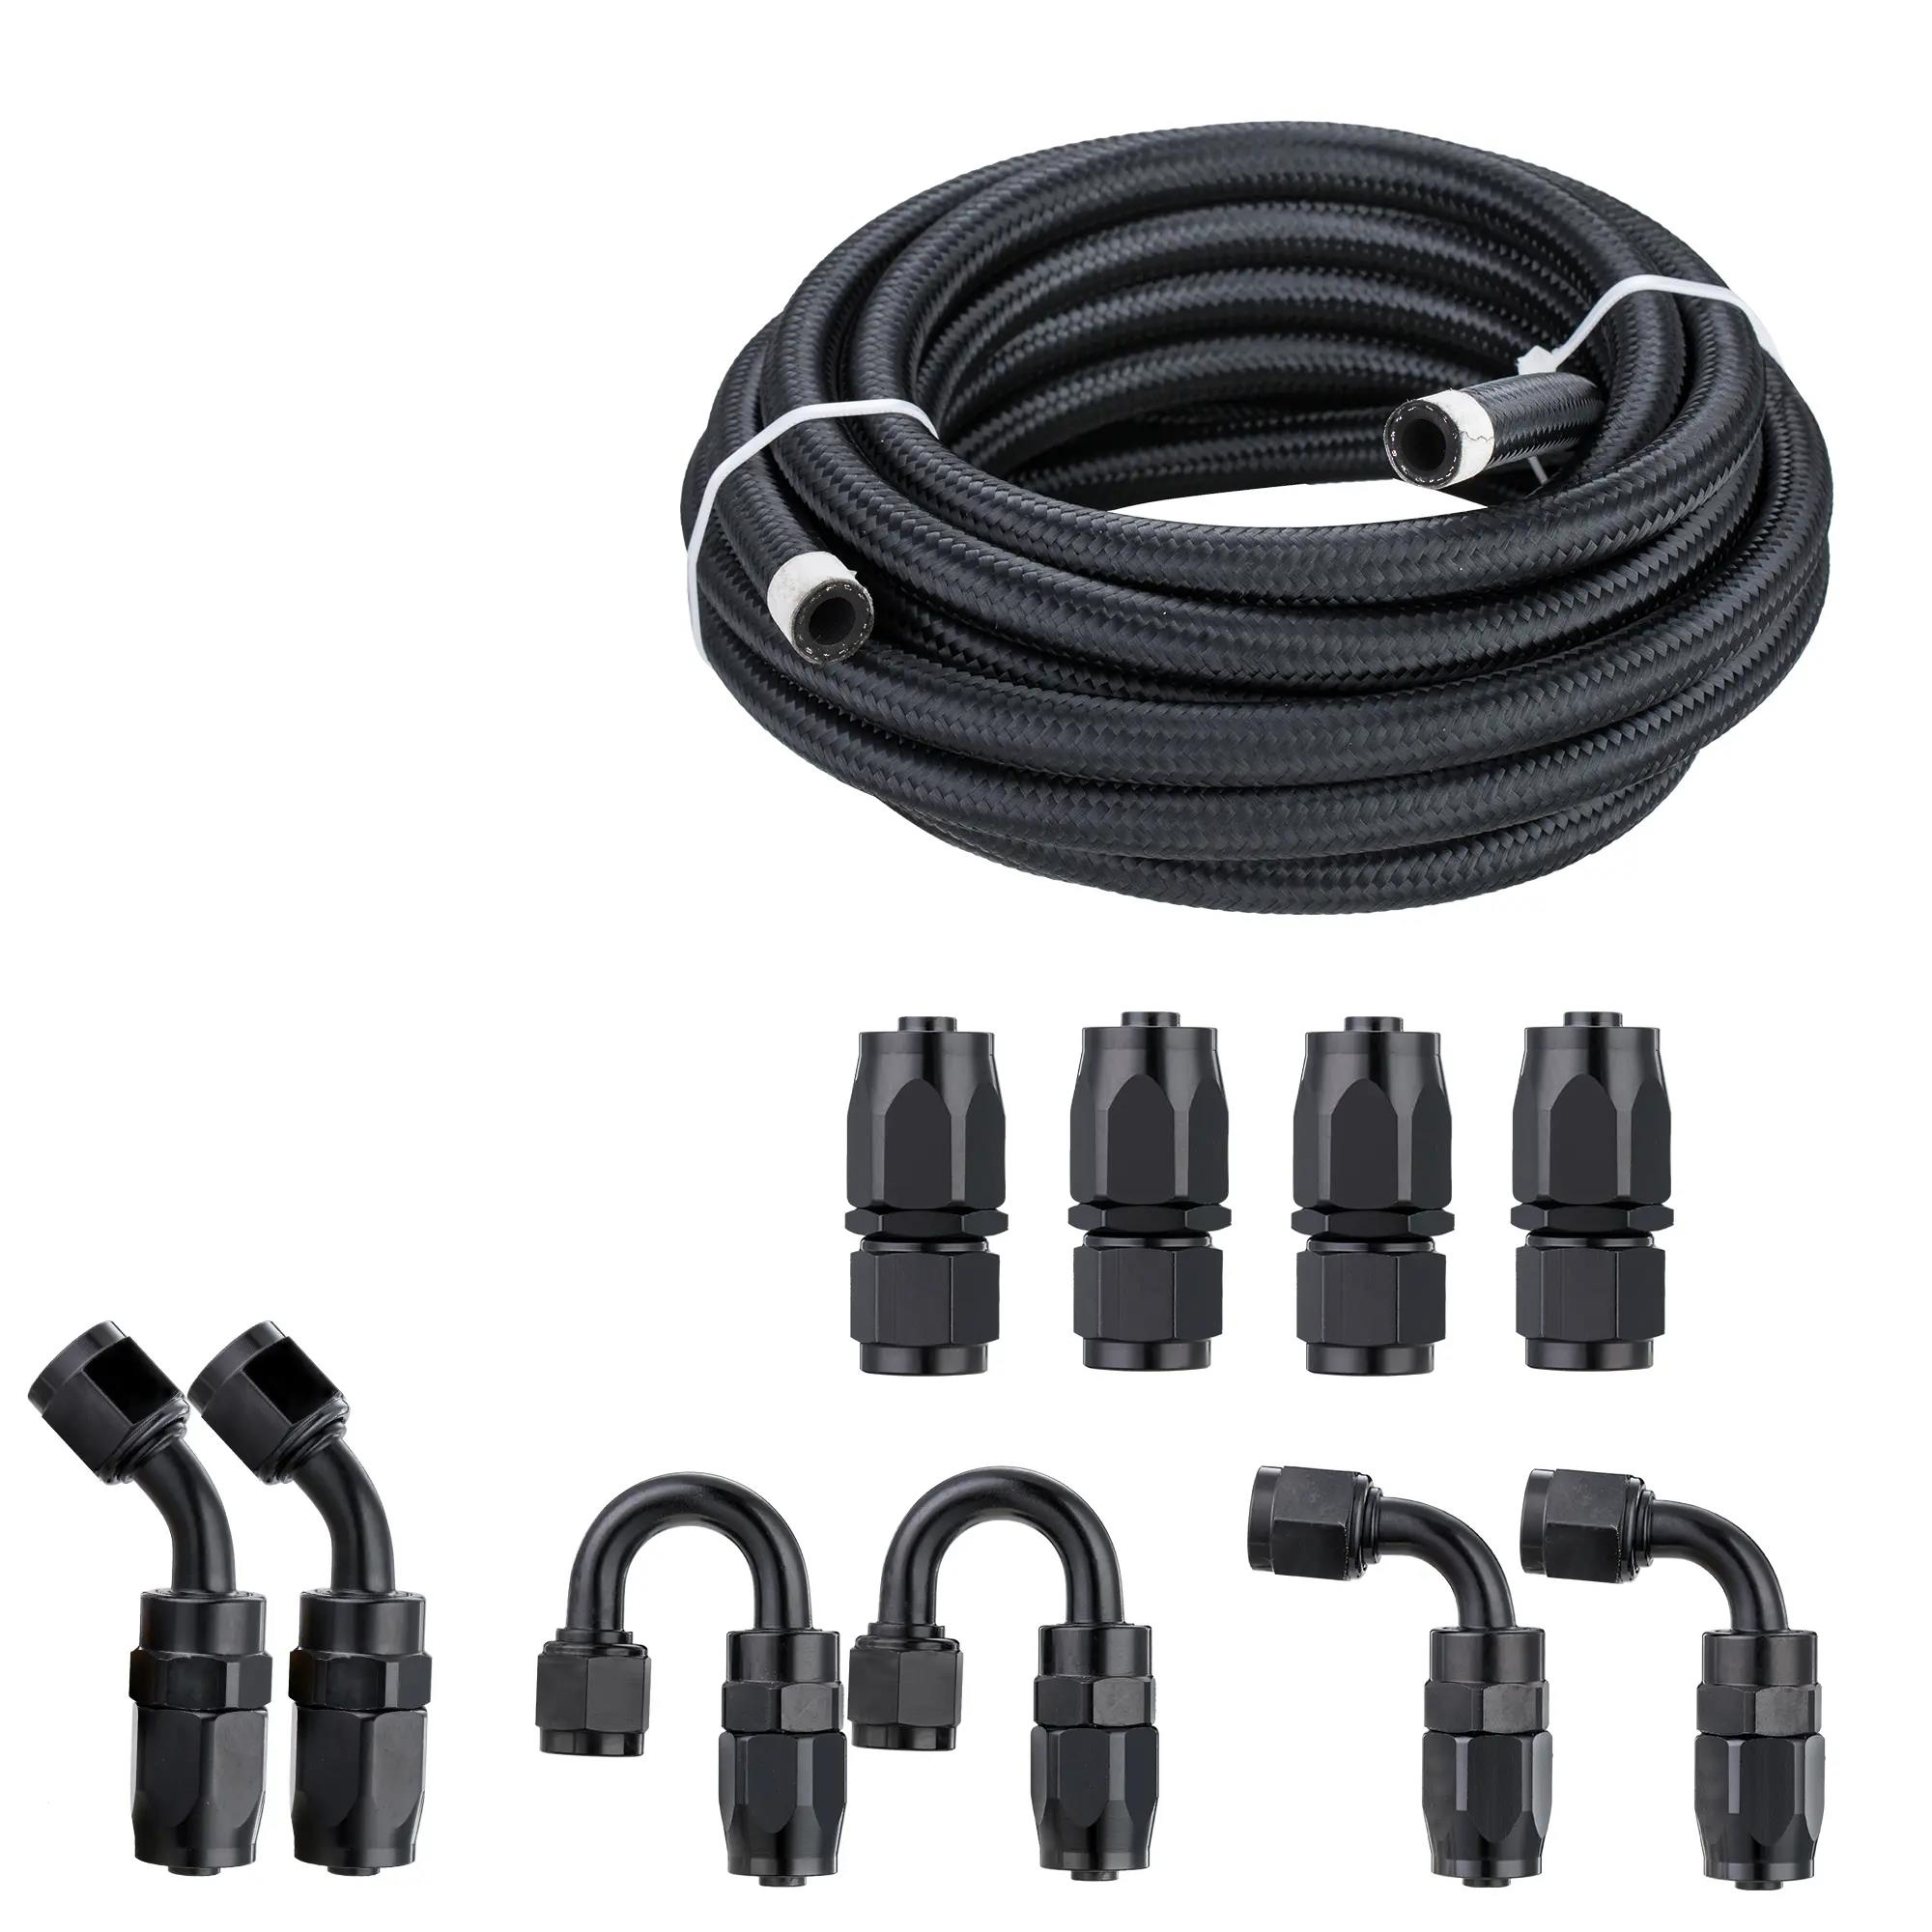 Haofa AN fitting hydraulic rubber hose flexible black fuel pump hose wire S.S braided pipe oil pumping hose